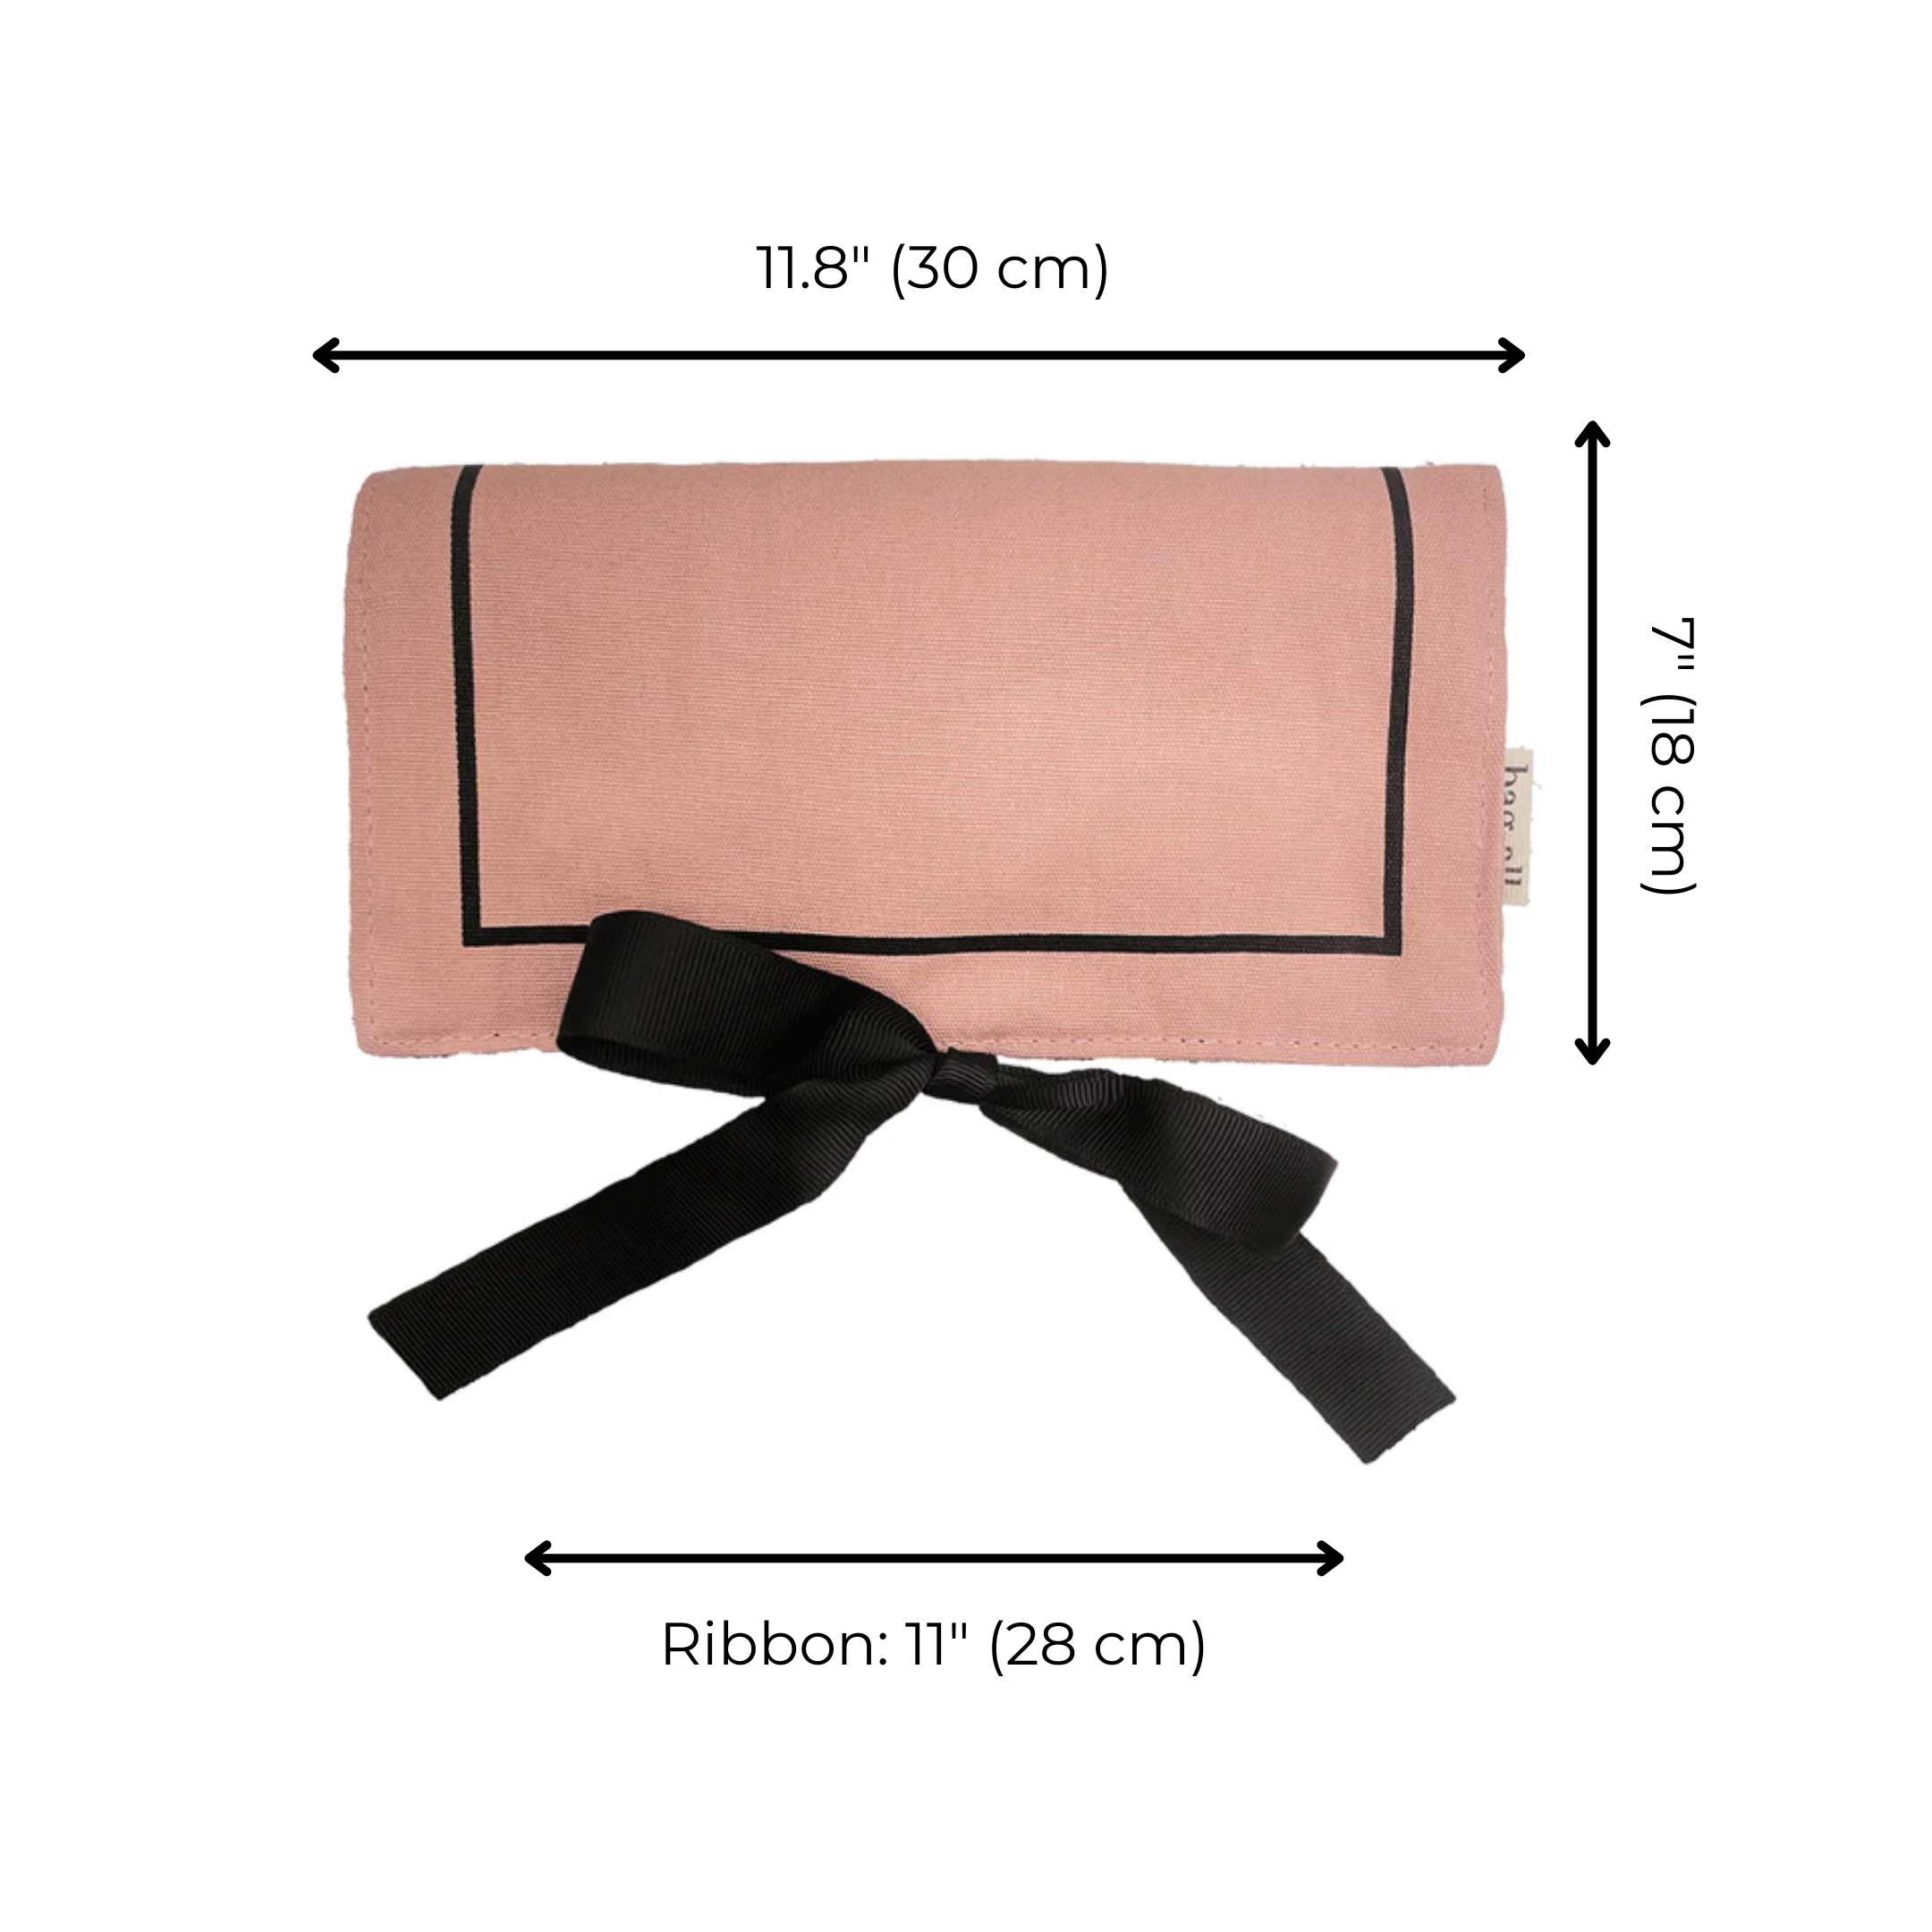 Jewelry Roll, Travel Pouch, Pink/Blush | Bag-all